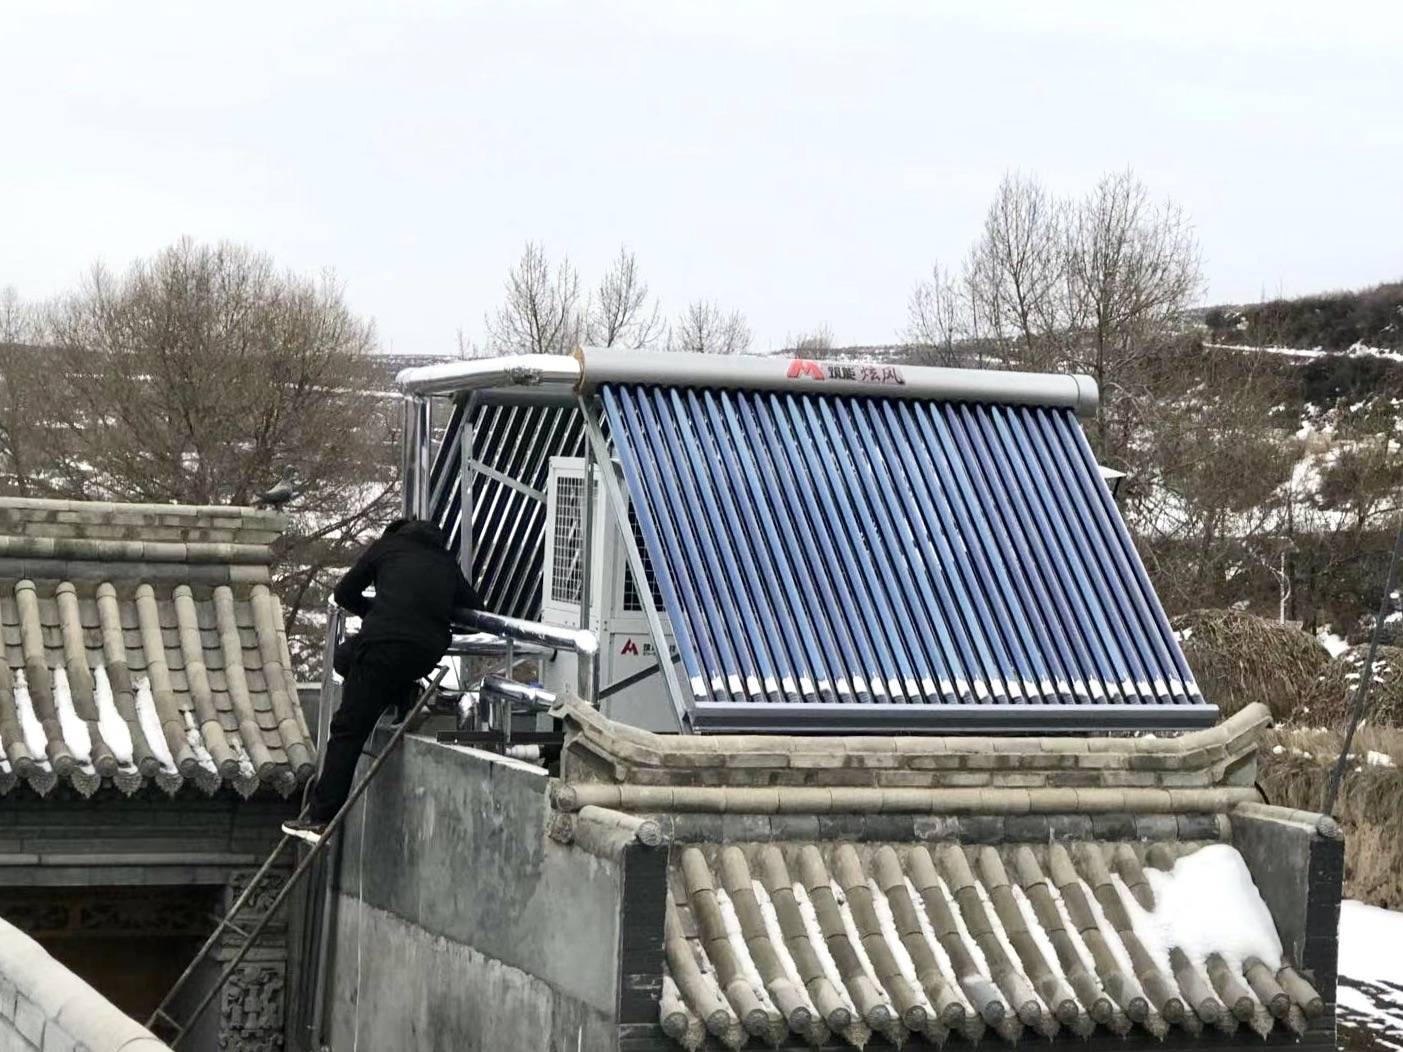 RurEnergy: Promoting sustainable residential energy consumption in rural China